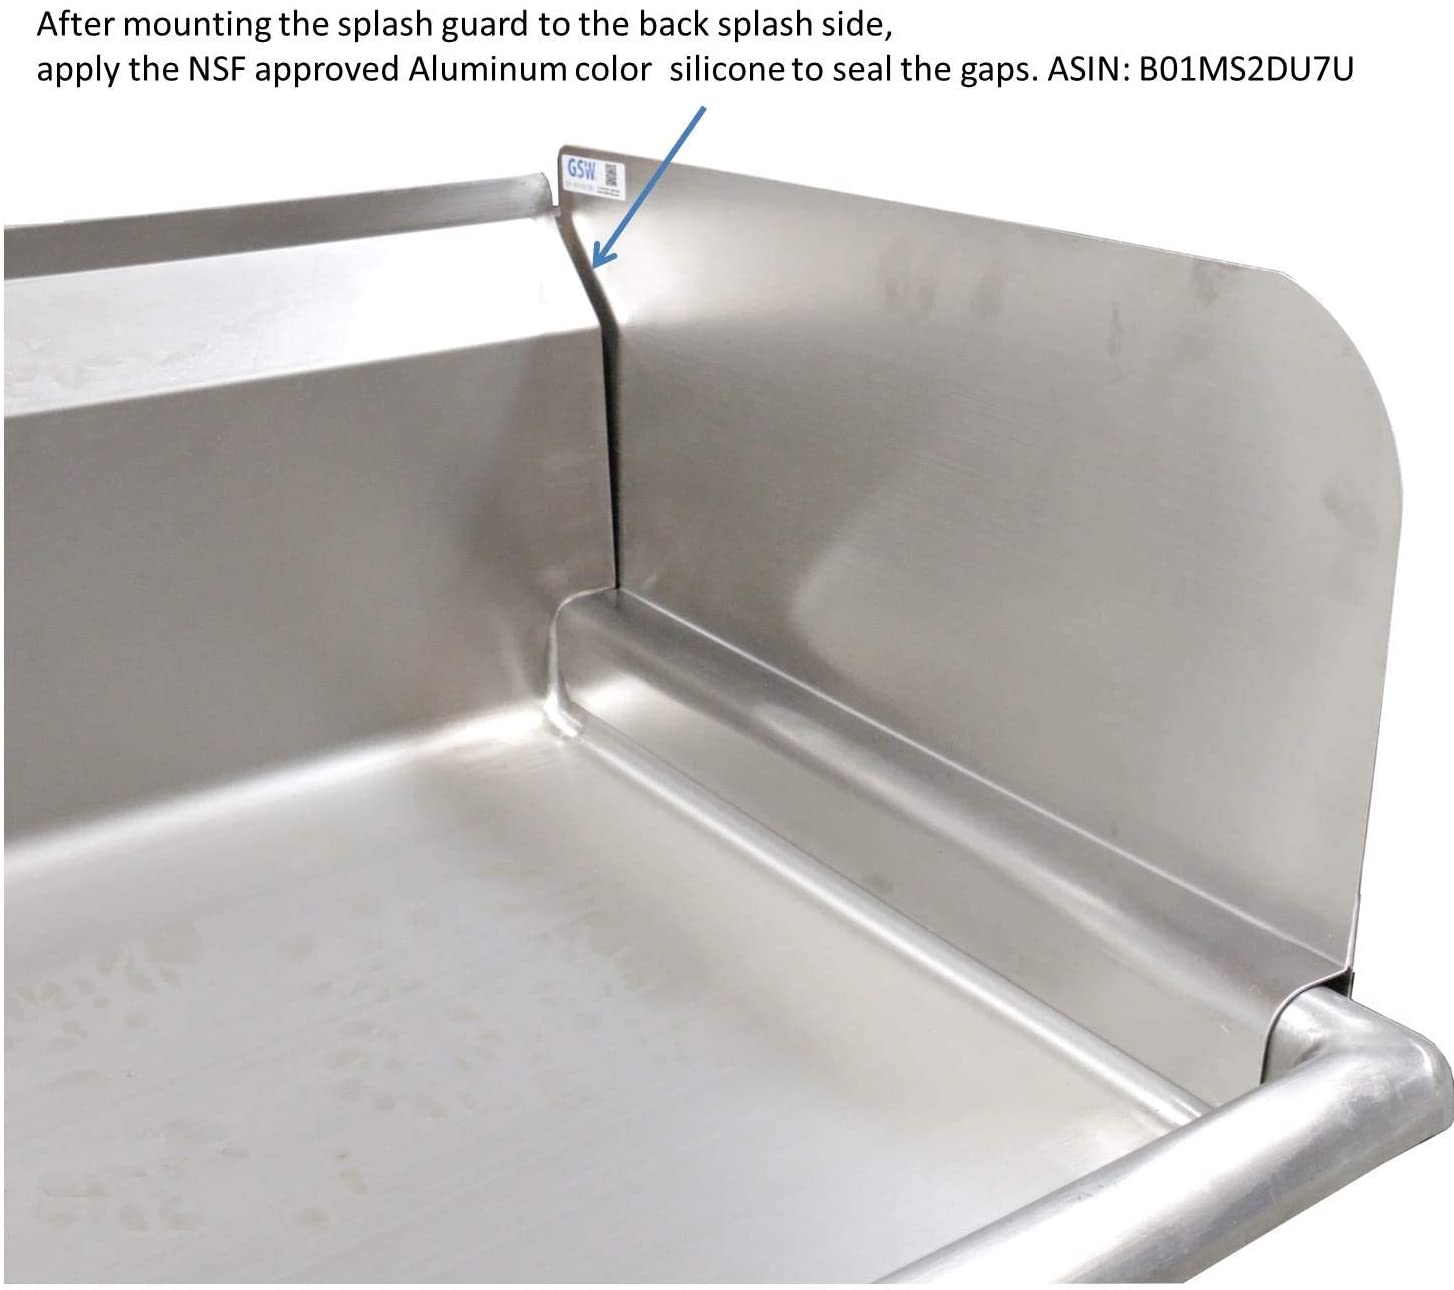 Leyso SP-SH1810R Stainless Steel Insert Type Splash Guard for Compartment Sinks (22" L x 11" H Right)